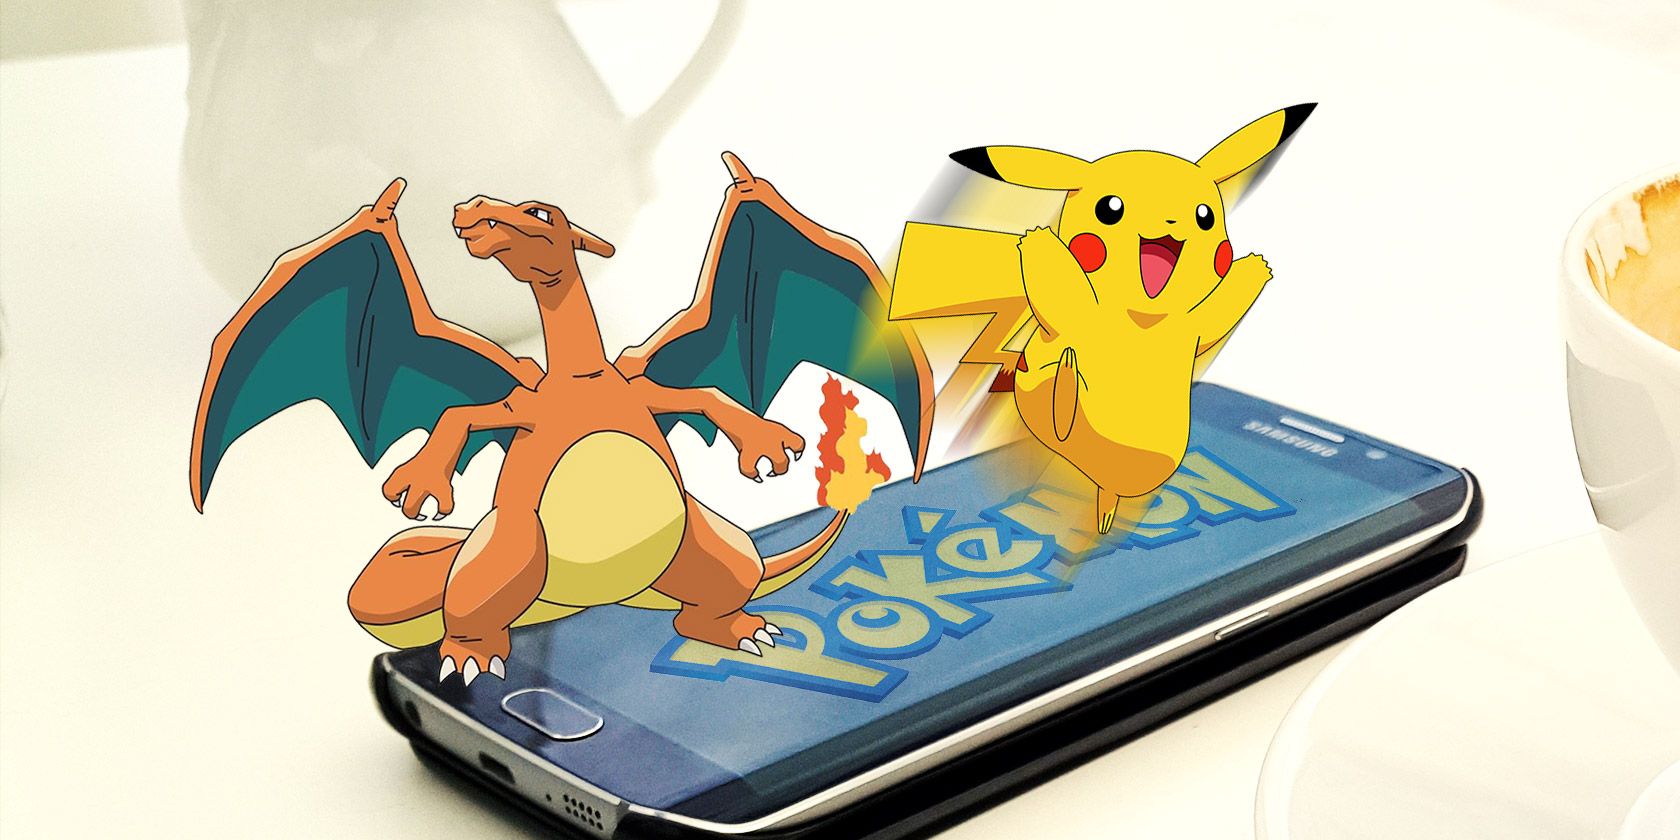 How to Emulate Old Pokemon Games on Your Android Phone